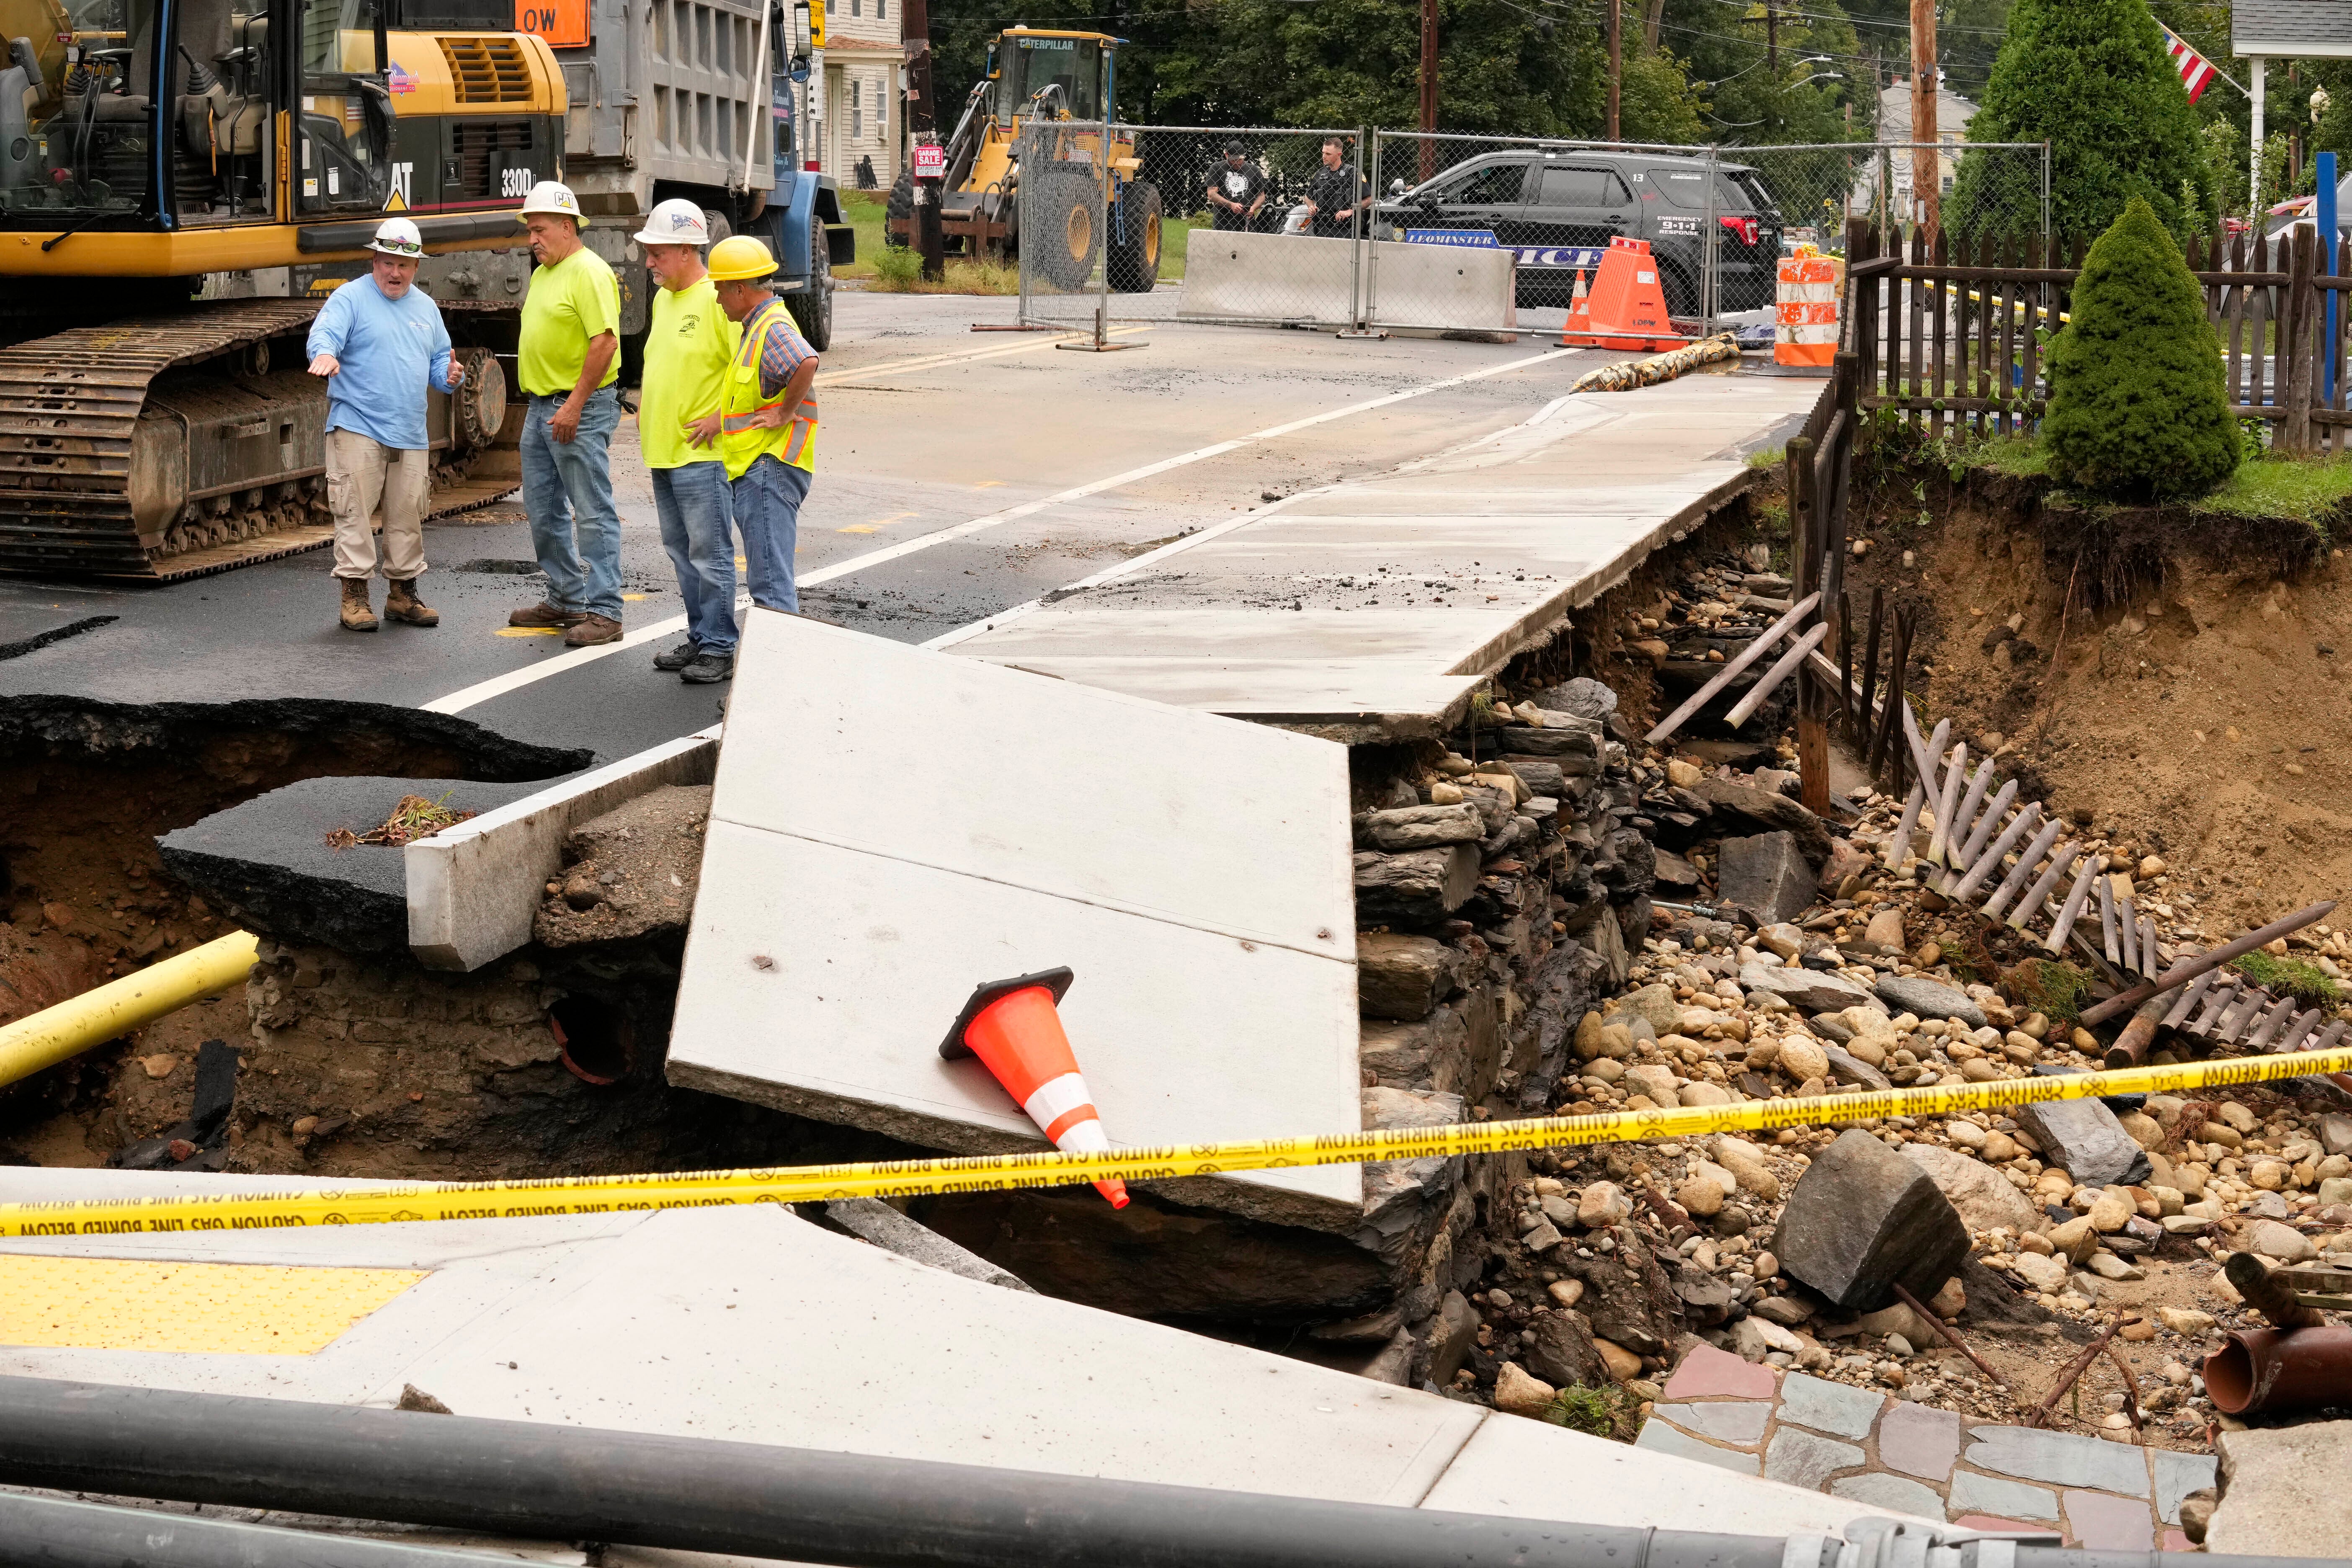 Public works officials examine the damage to a road and front yard that was washed away by recent flooding, Wednesday, Sept. 13, 2023, in Leominster, Mass.